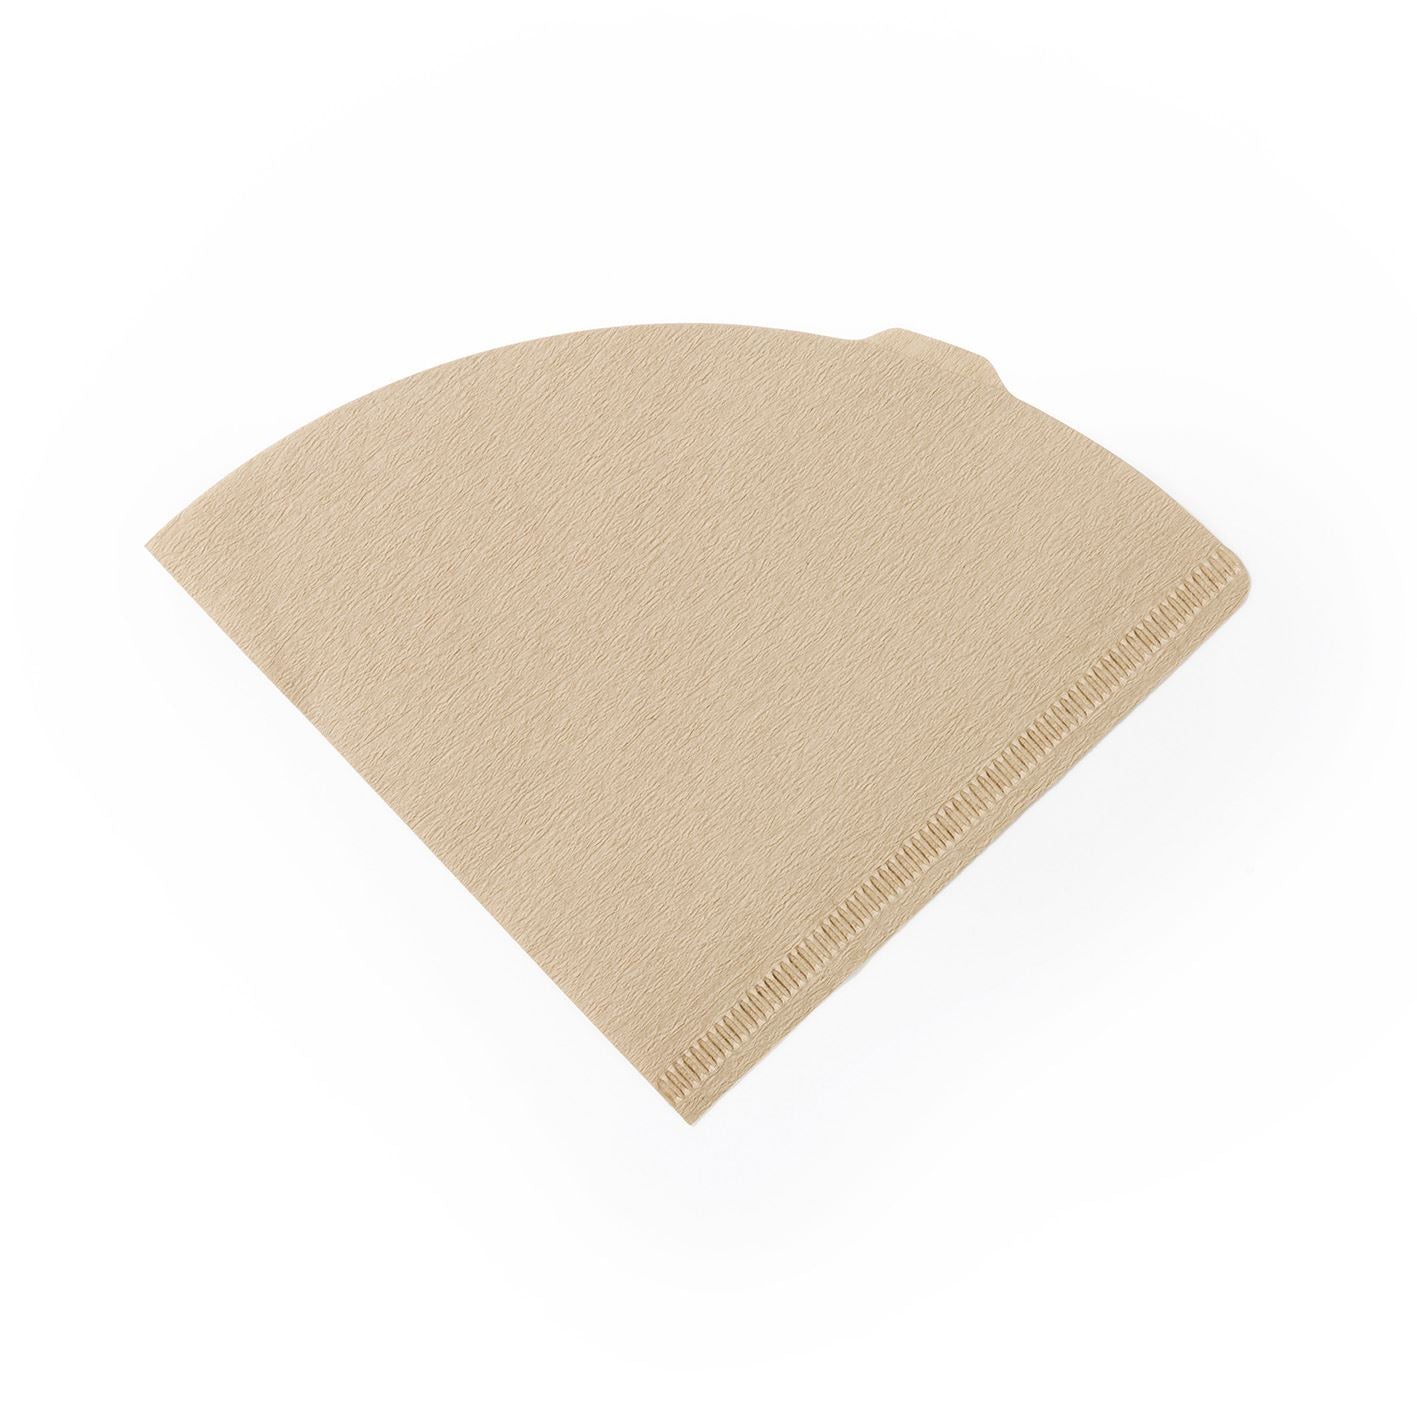 Coffee Filter Paper Cones (Set of 100)